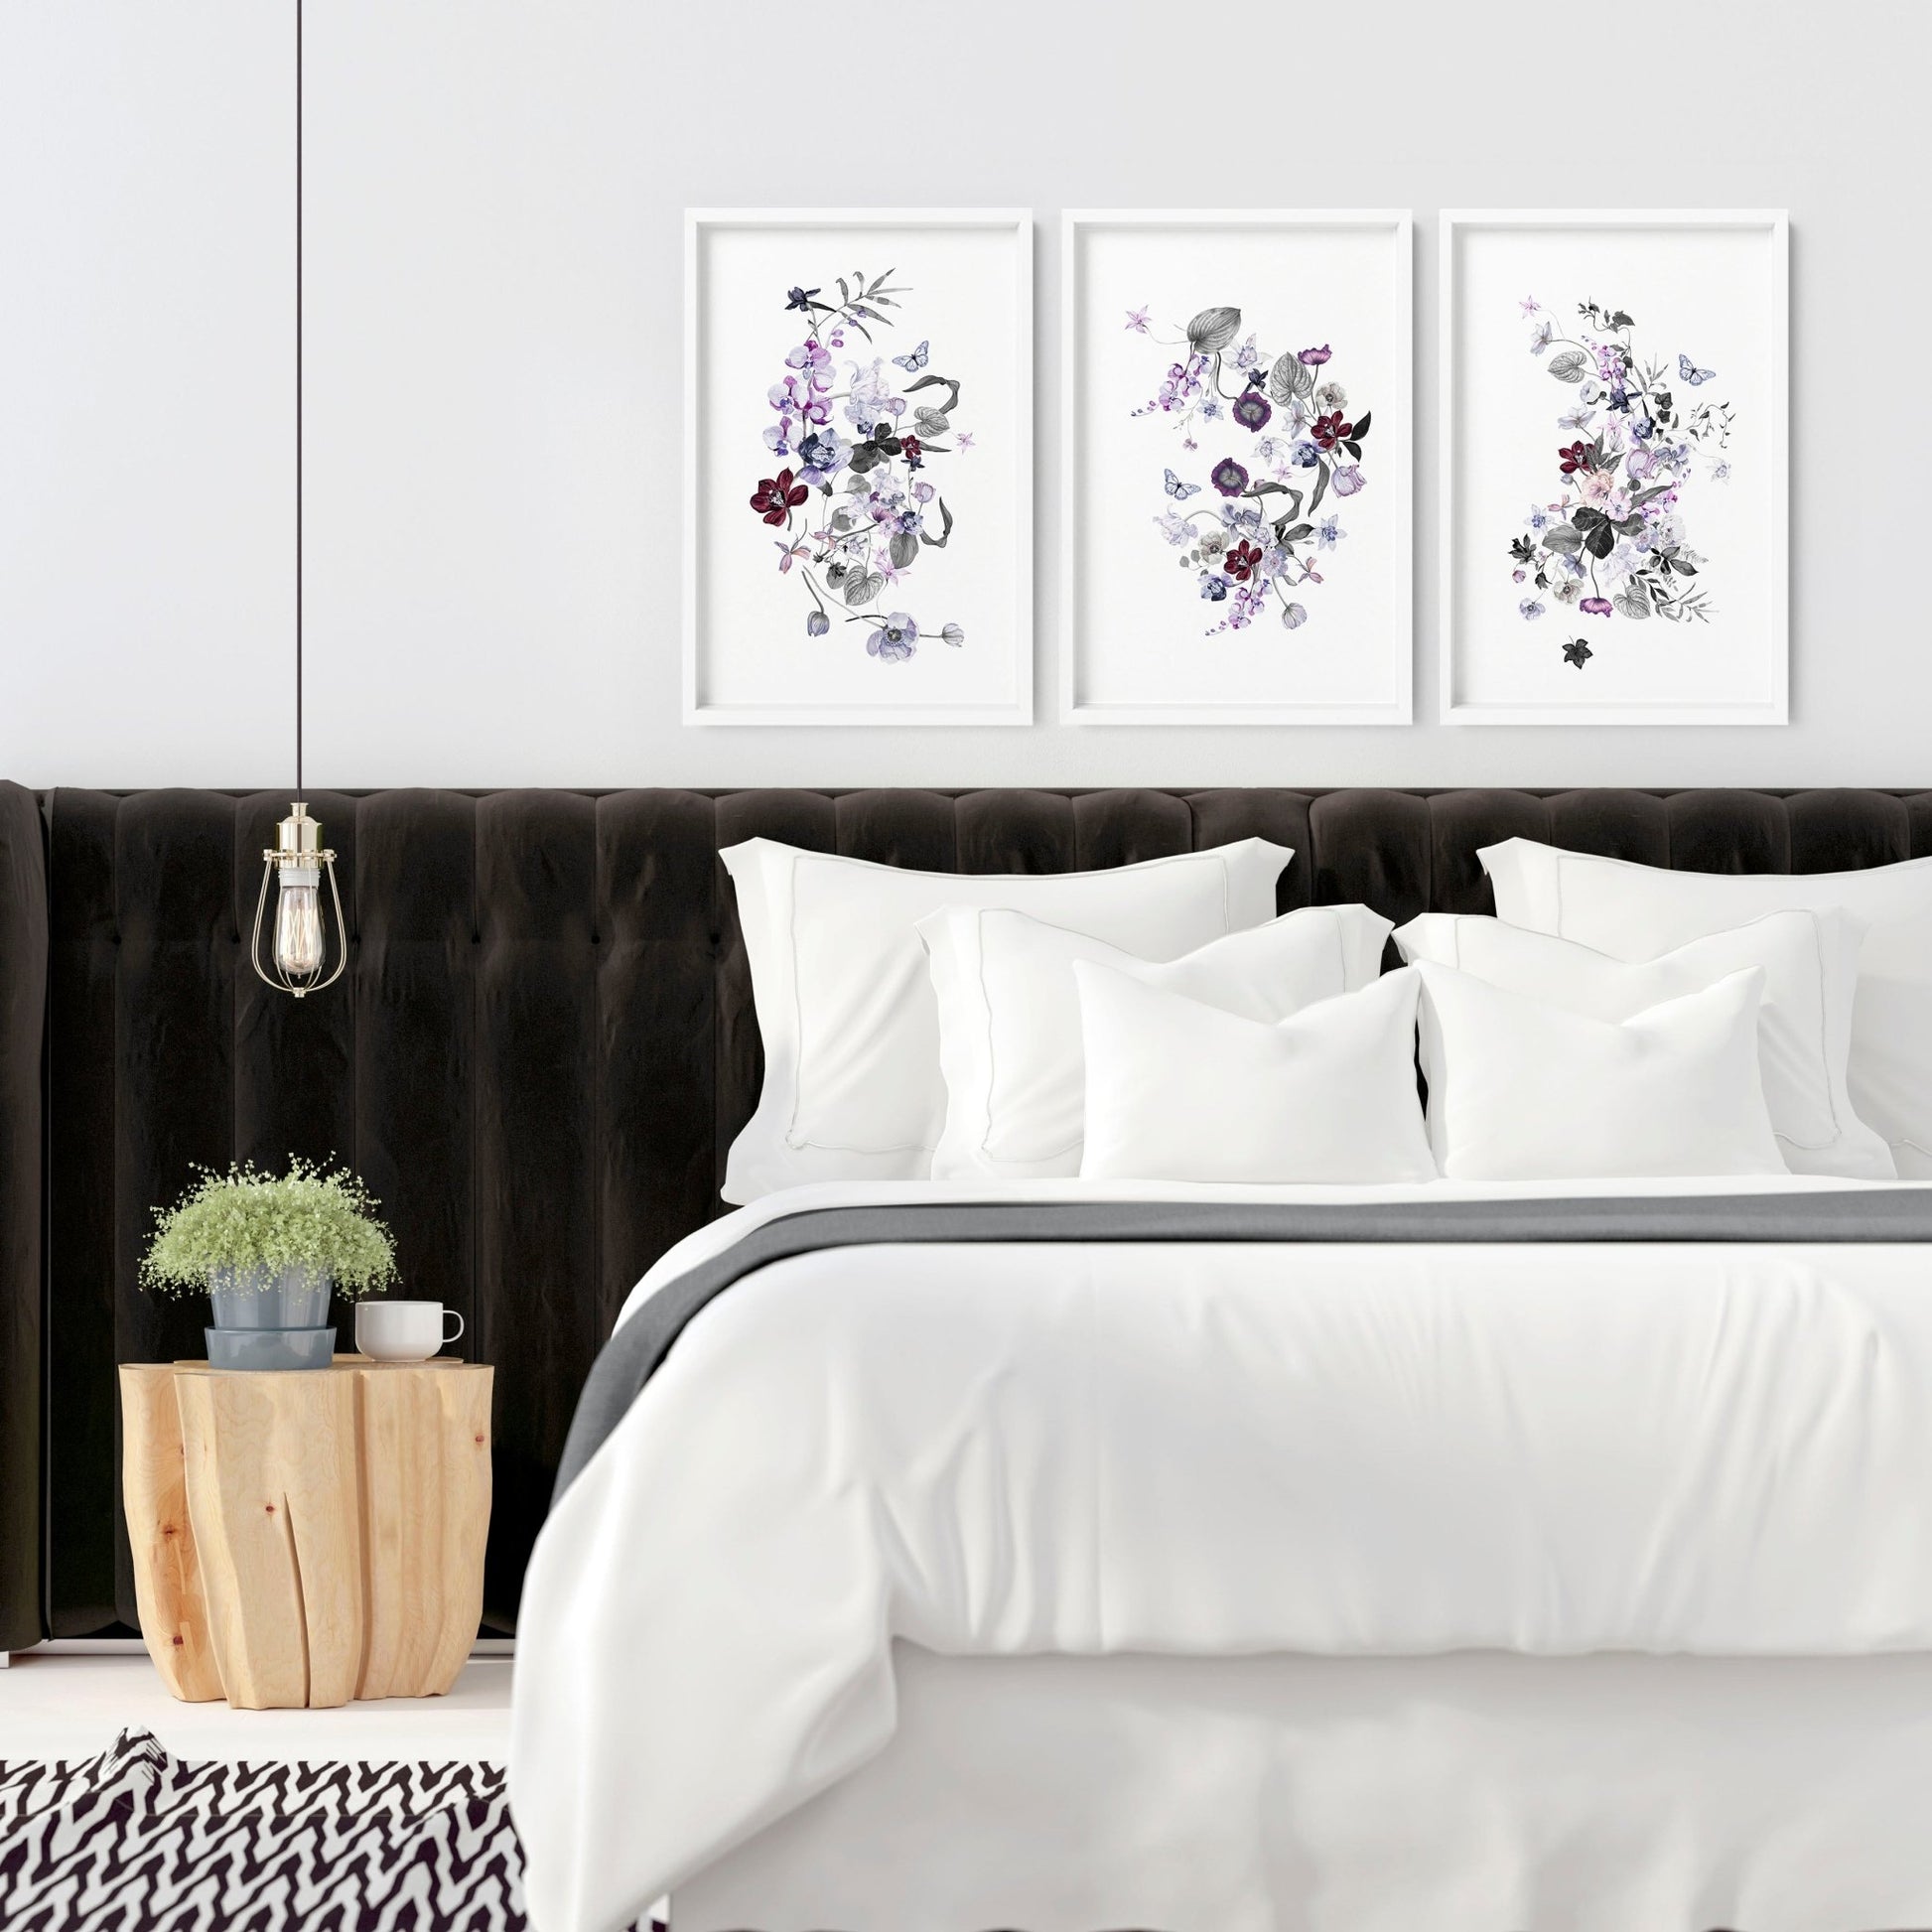 Wall art for the bedroom | set of 3 prints - About Wall Art